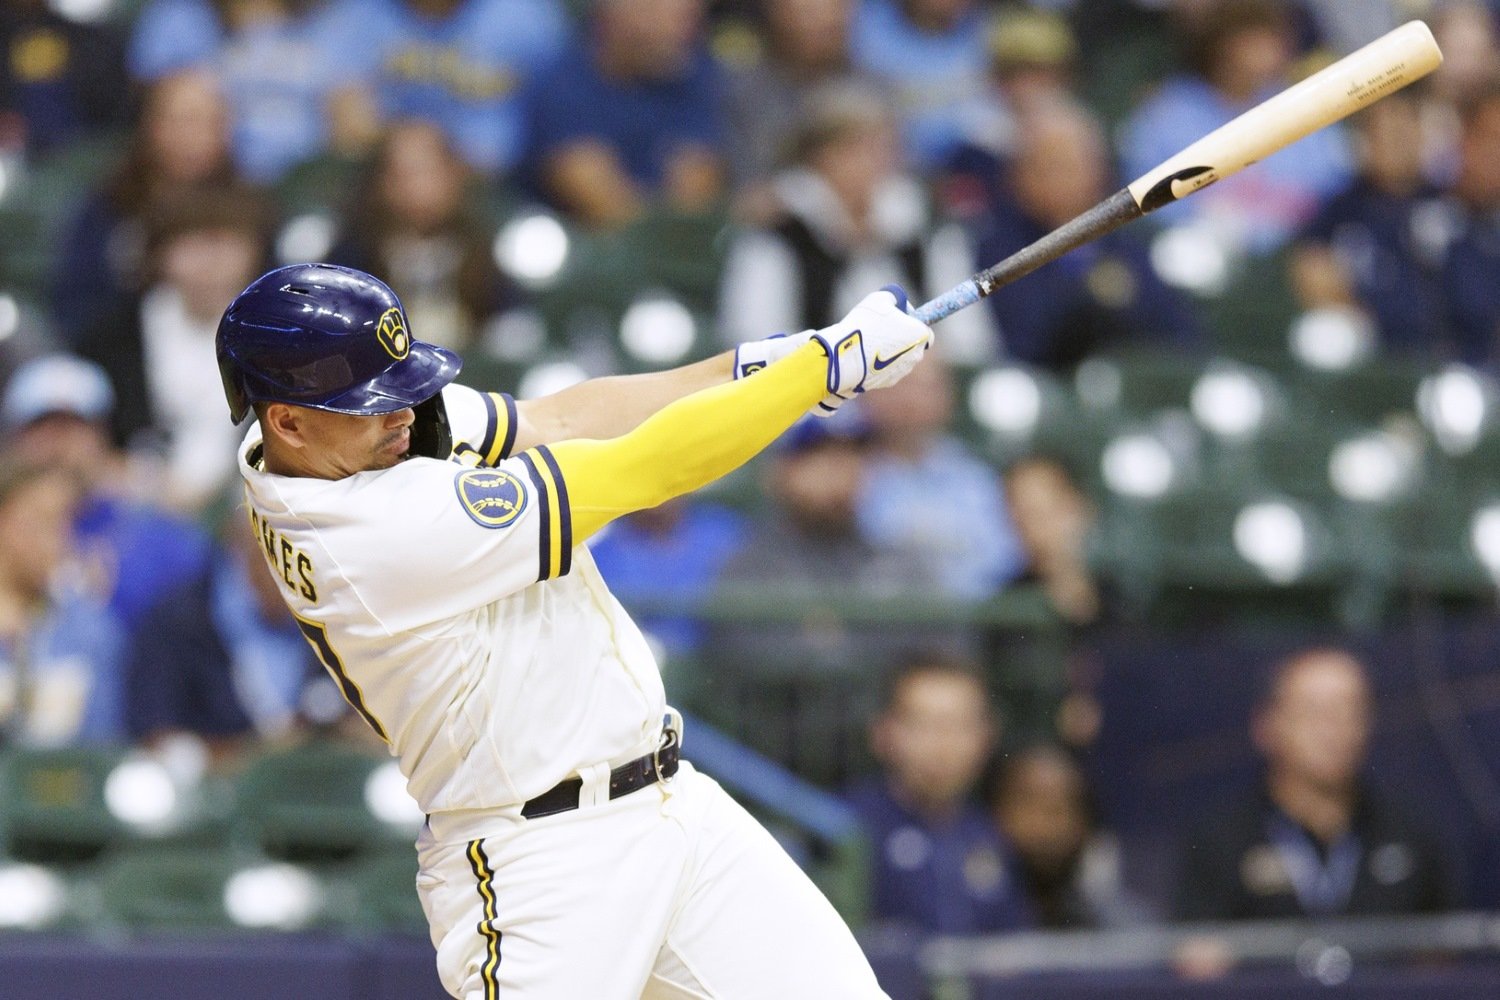 Biscuits All-Star: Willy Adames